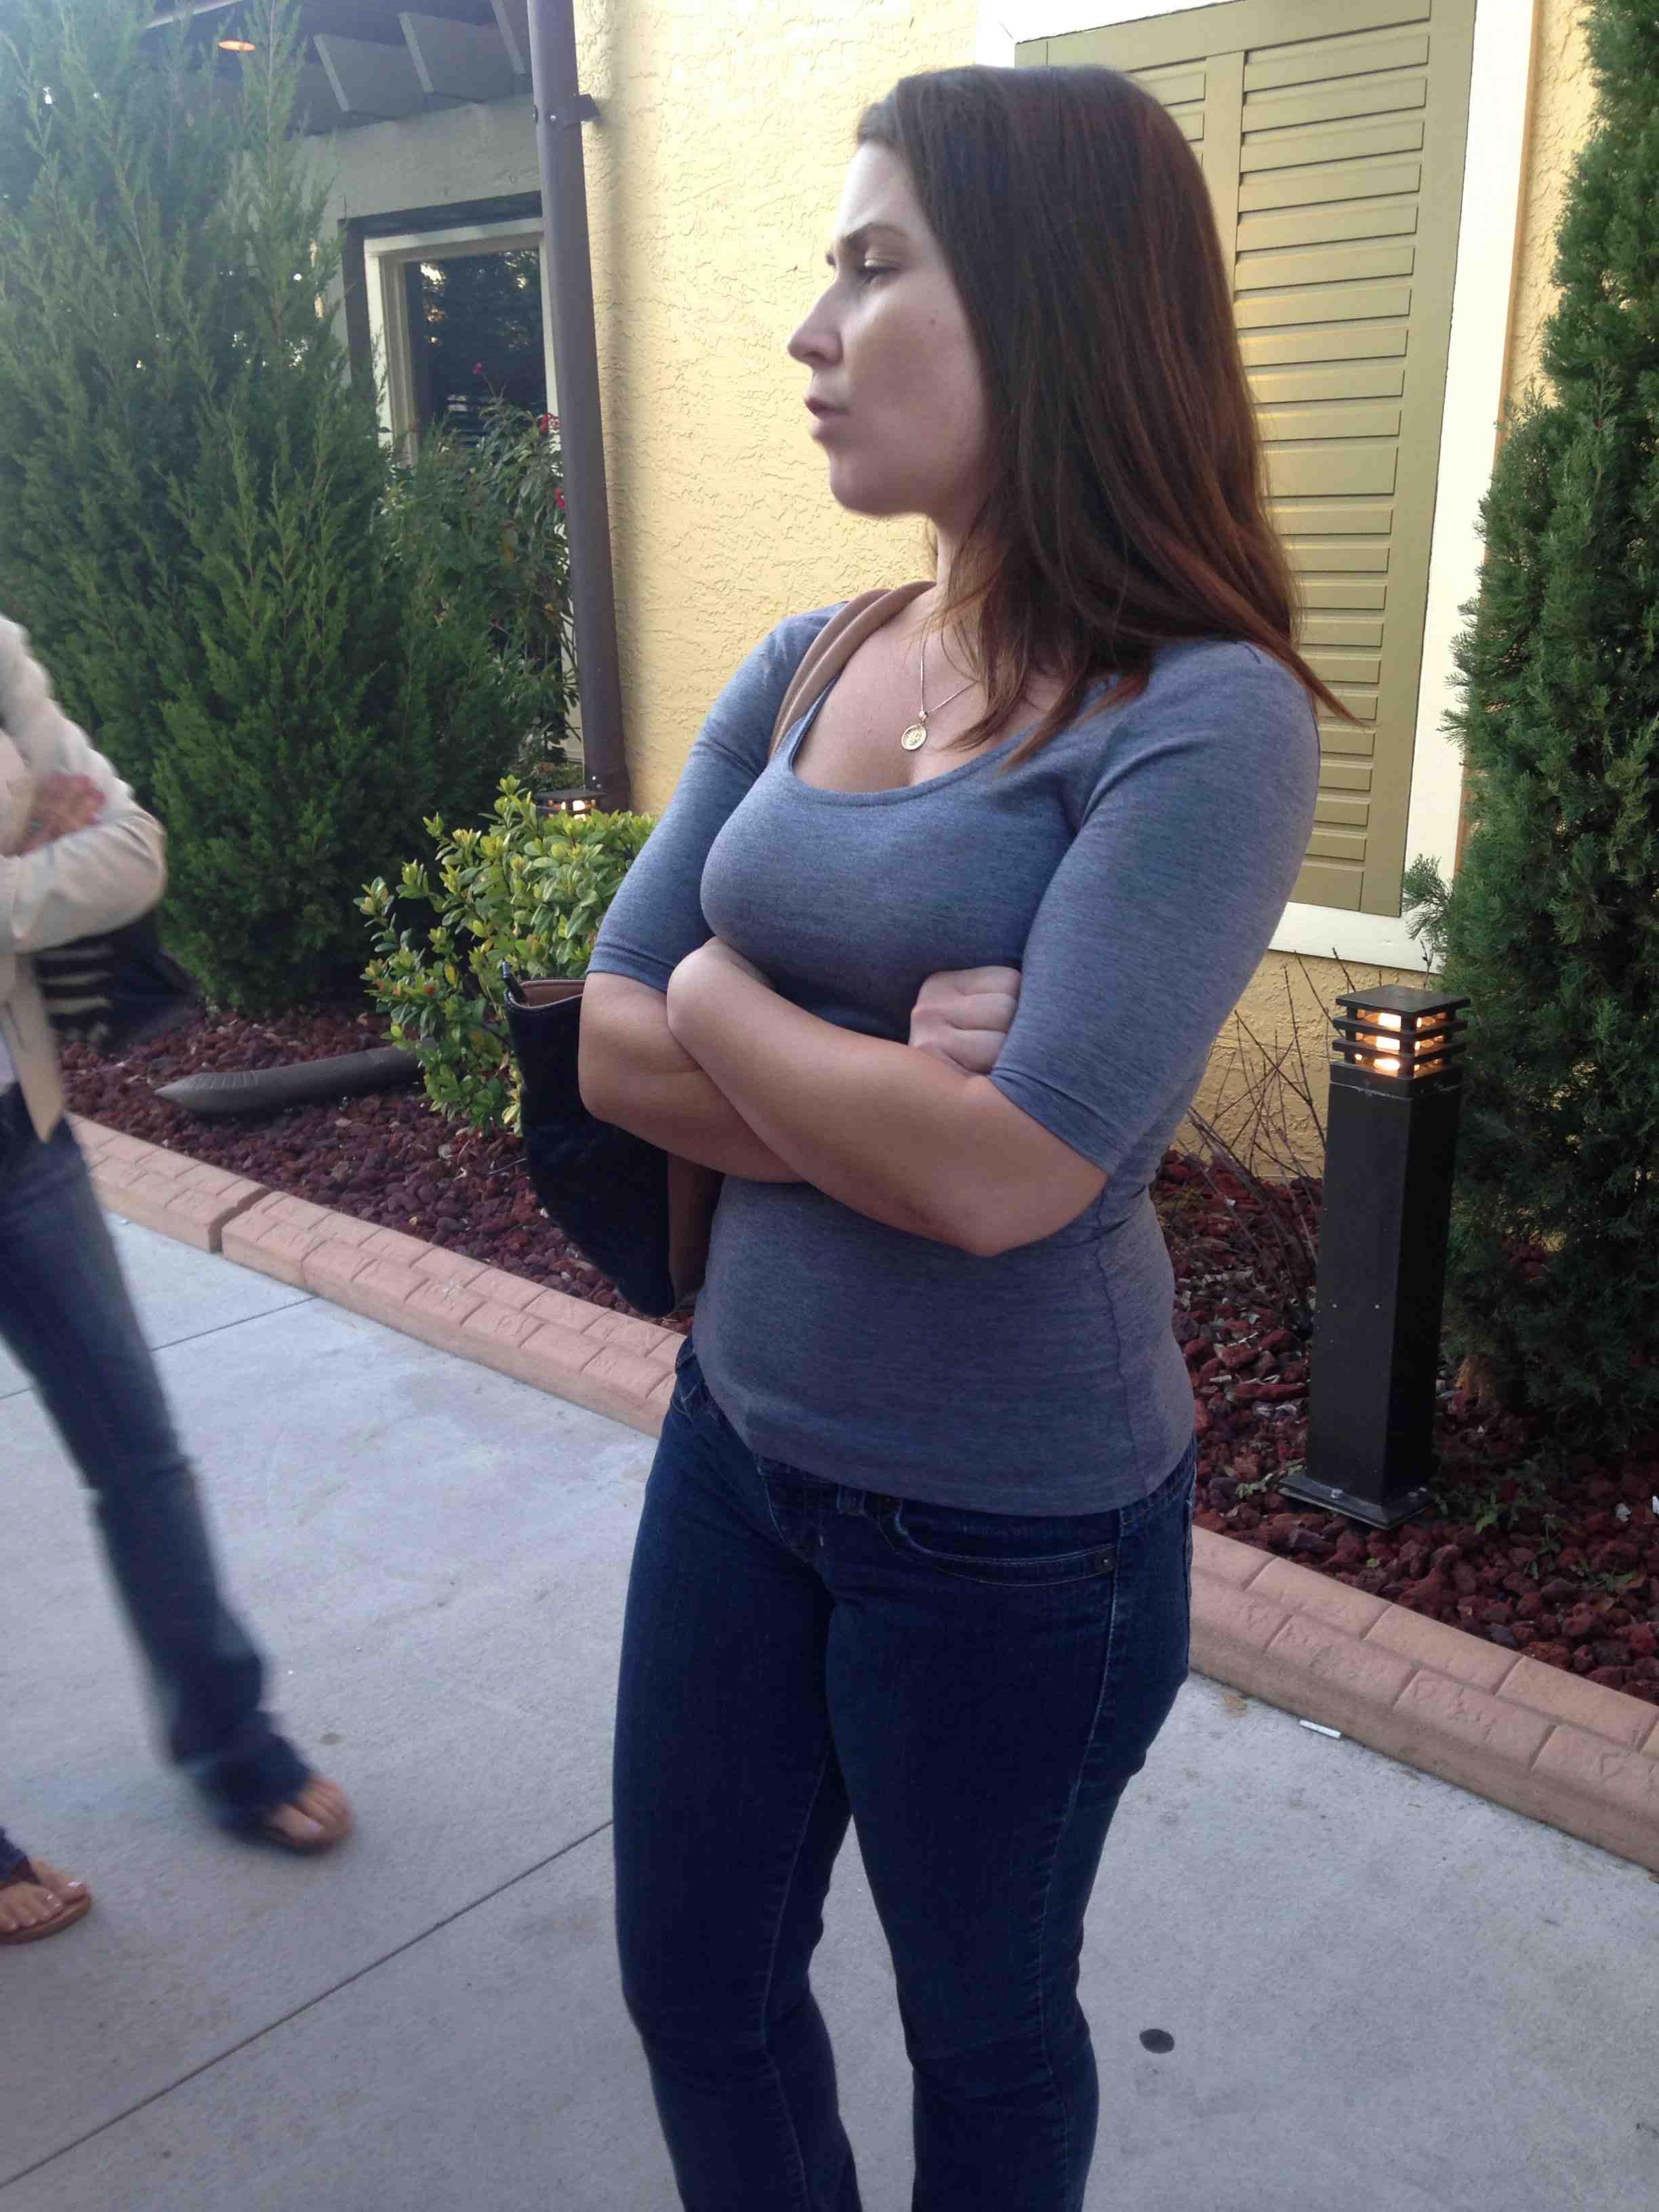 My aunt in jeans porn pics